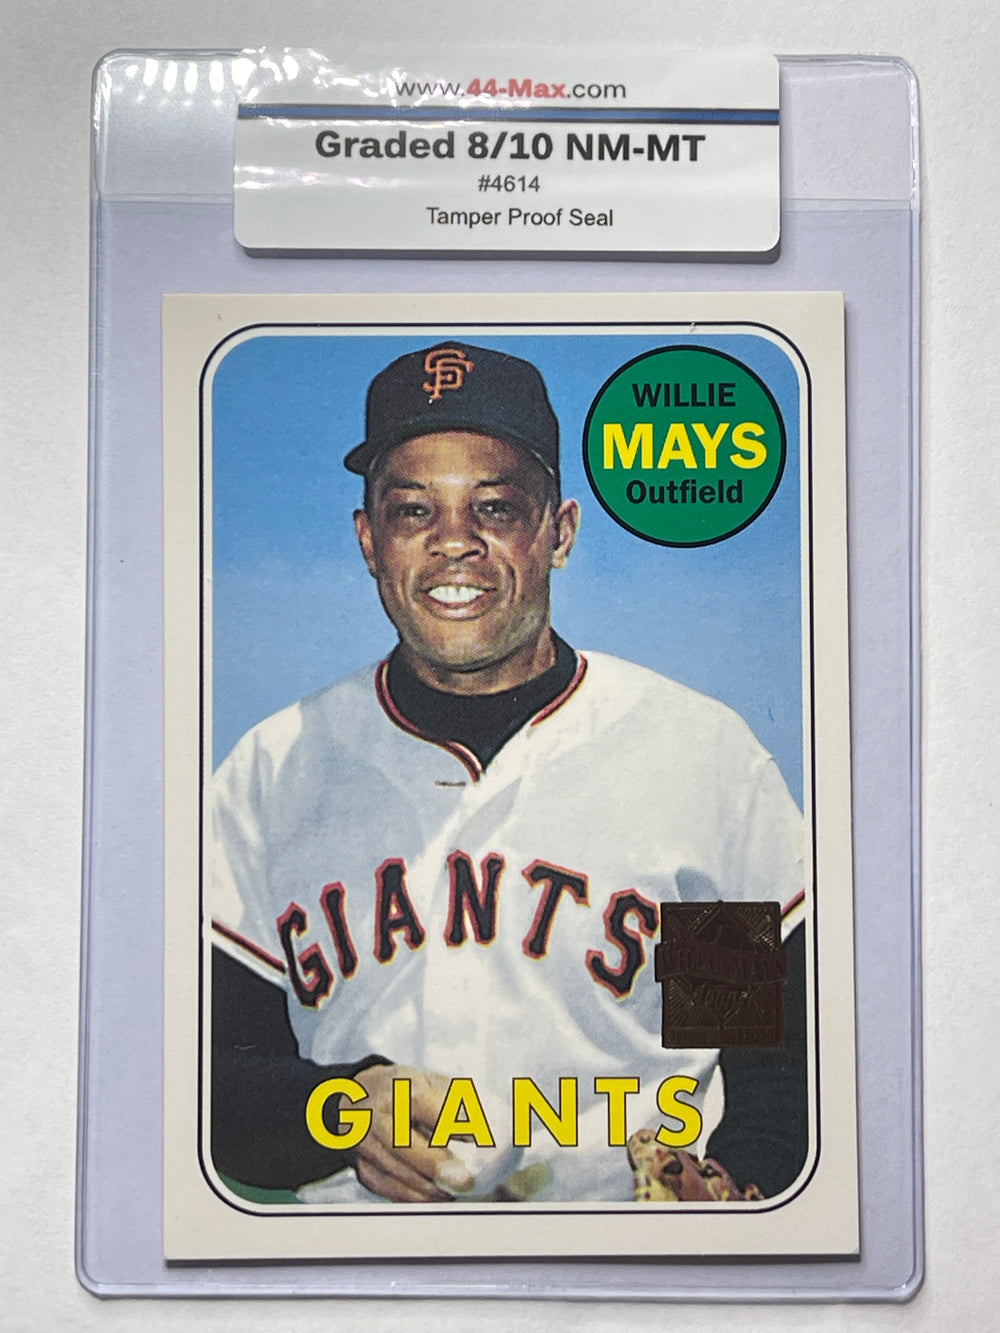 Willie Mays 1996 Topps Card. 44-Max 8/10 NM-MT #4614